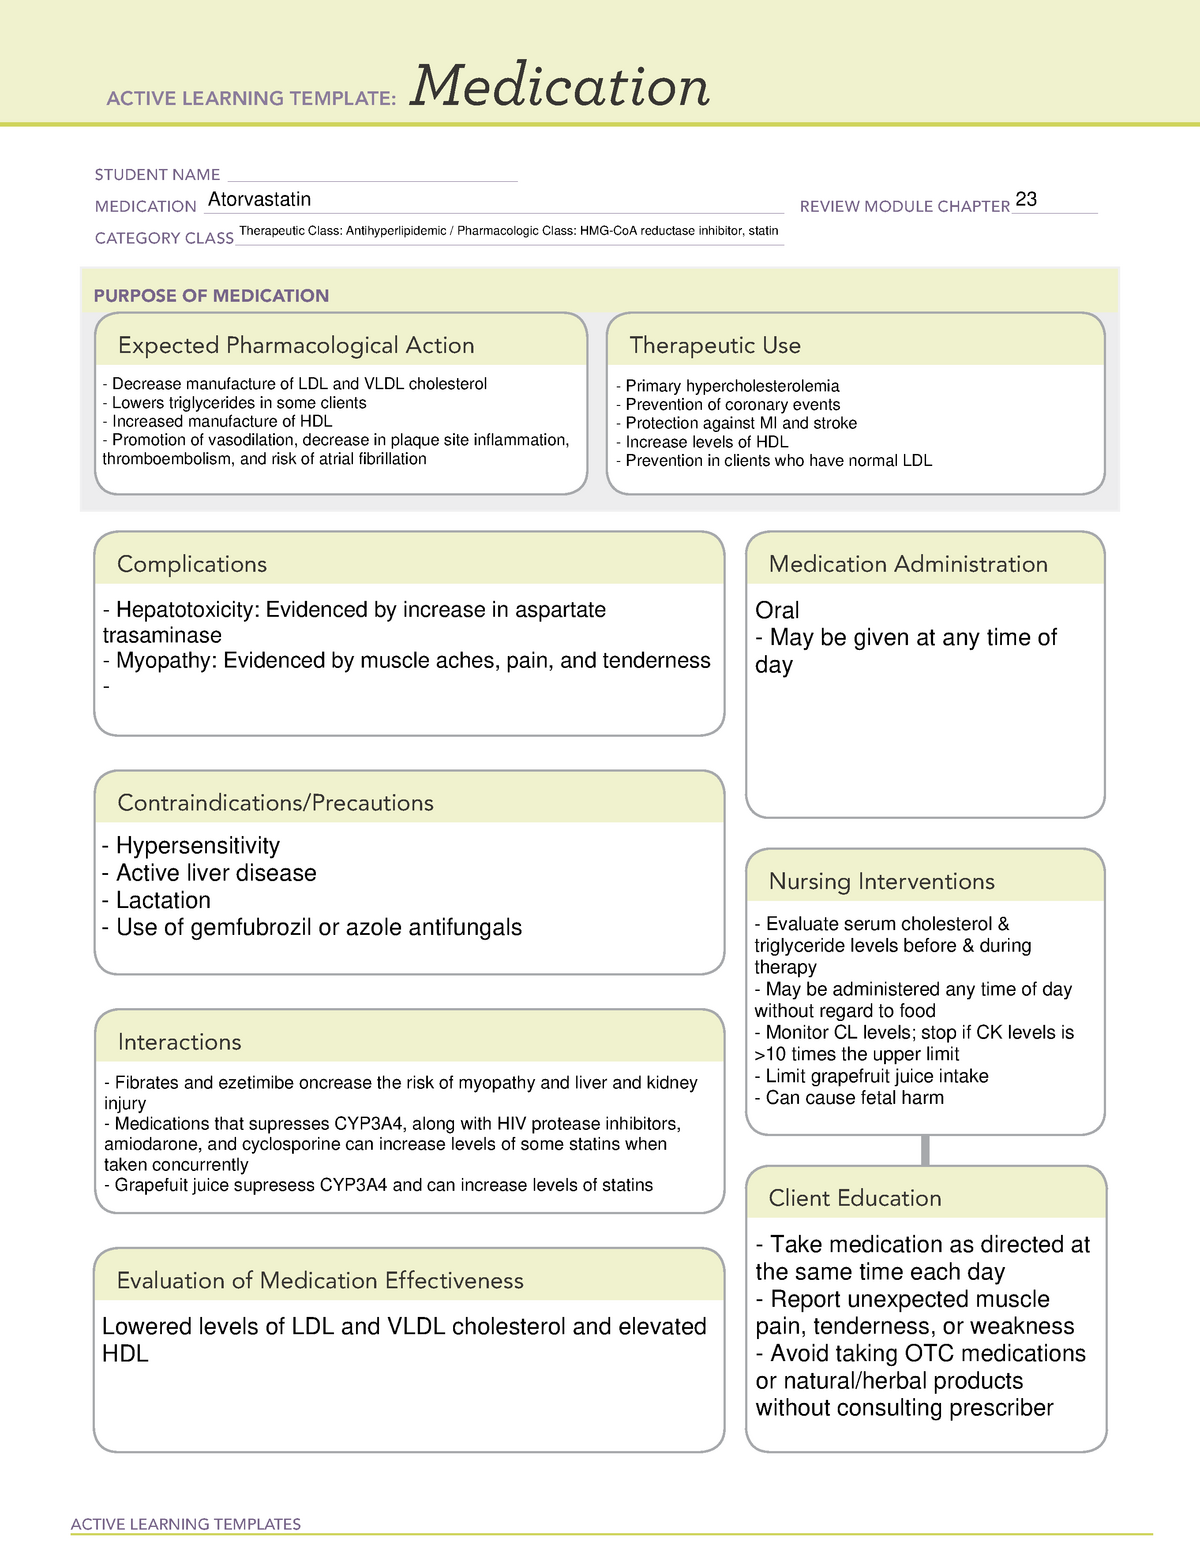 Atorvastatin Med Card ACTIVE LEARNING TEMPLATES Medication STUDENT